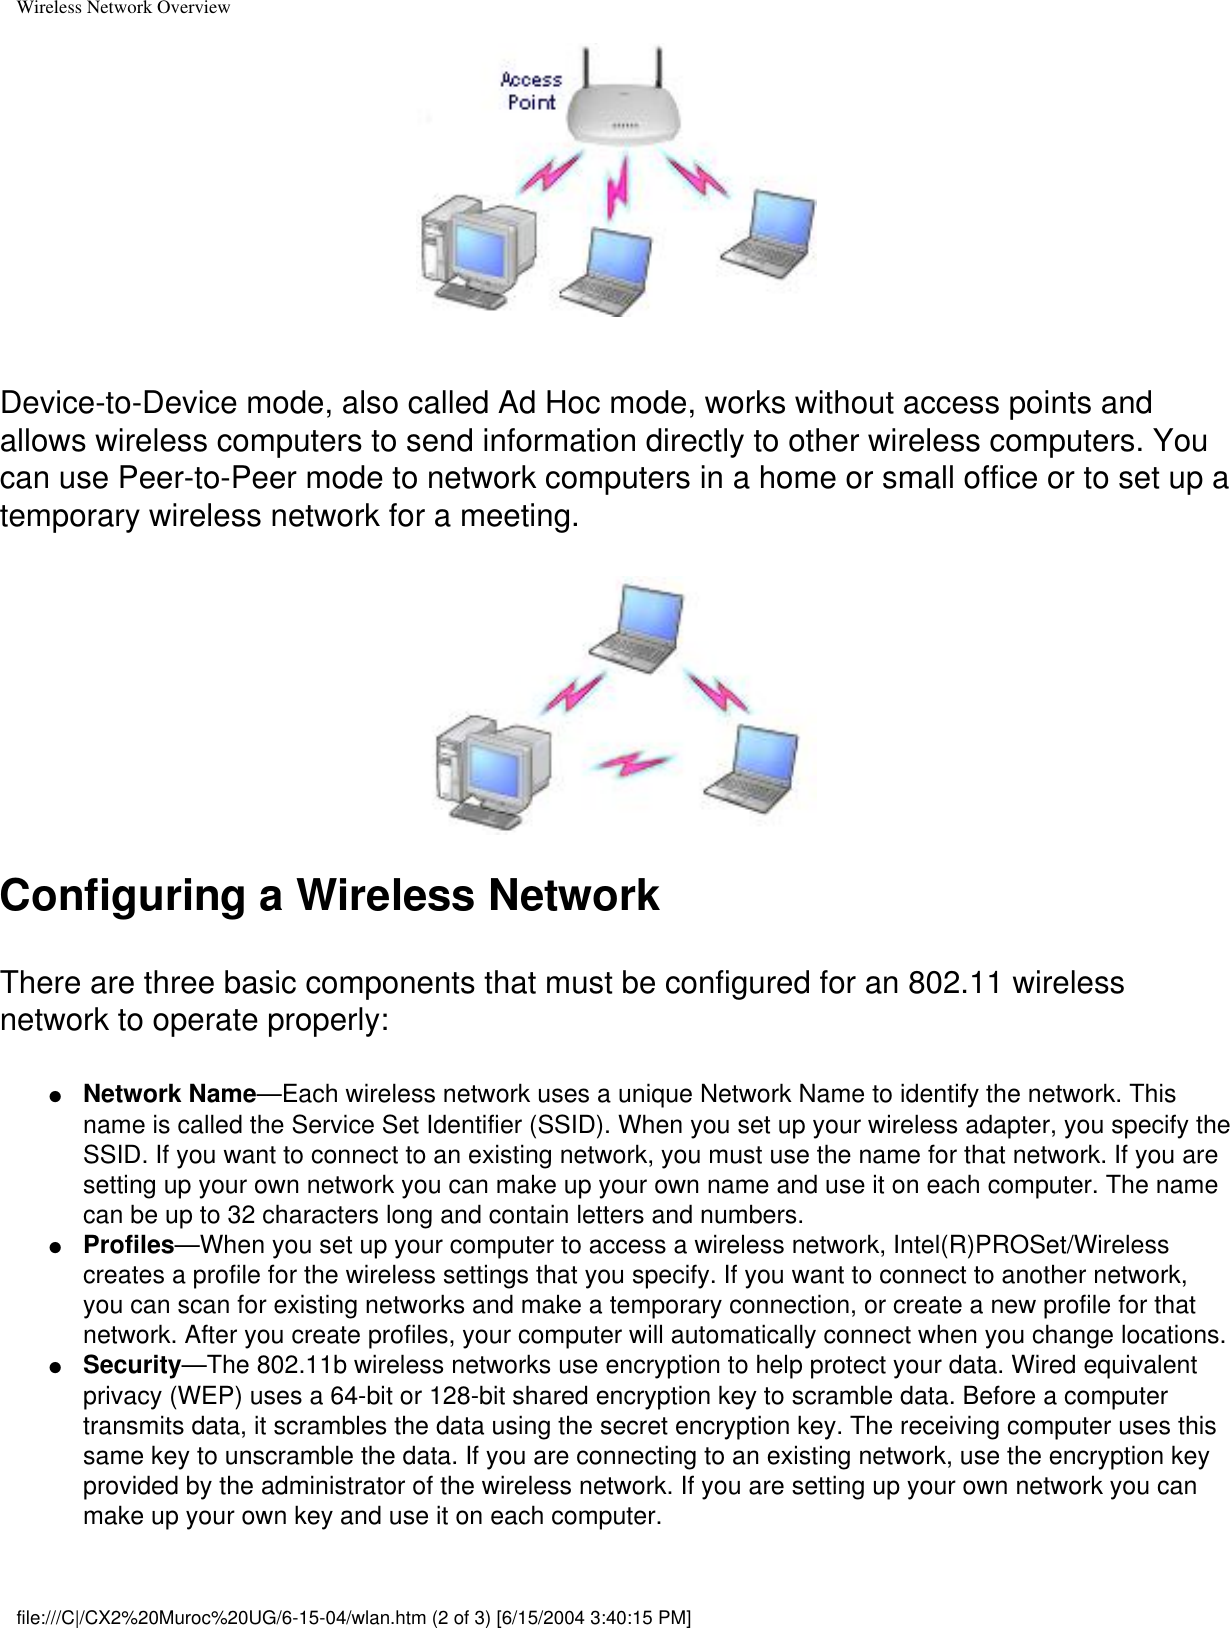 Wireless Network OverviewDevice-to-Device mode, also called Ad Hoc mode, works without access points and allows wireless computers to send information directly to other wireless computers. You can use Peer-to-Peer mode to network computers in a home or small office or to set up a temporary wireless network for a meeting. Configuring a Wireless NetworkThere are three basic components that must be configured for an 802.11 wireless network to operate properly: ●     Network Name—Each wireless network uses a unique Network Name to identify the network. This name is called the Service Set Identifier (SSID). When you set up your wireless adapter, you specify the SSID. If you want to connect to an existing network, you must use the name for that network. If you are setting up your own network you can make up your own name and use it on each computer. The name can be up to 32 characters long and contain letters and numbers.●     Profiles—When you set up your computer to access a wireless network, Intel(R)PROSet/Wireless creates a profile for the wireless settings that you specify. If you want to connect to another network, you can scan for existing networks and make a temporary connection, or create a new profile for that network. After you create profiles, your computer will automatically connect when you change locations.●     Security—The 802.11b wireless networks use encryption to help protect your data. Wired equivalent privacy (WEP) uses a 64-bit or 128-bit shared encryption key to scramble data. Before a computer transmits data, it scrambles the data using the secret encryption key. The receiving computer uses this same key to unscramble the data. If you are connecting to an existing network, use the encryption key provided by the administrator of the wireless network. If you are setting up your own network you can make up your own key and use it on each computer. file:///C|/CX2%20Muroc%20UG/6-15-04/wlan.htm (2 of 3) [6/15/2004 3:40:15 PM]